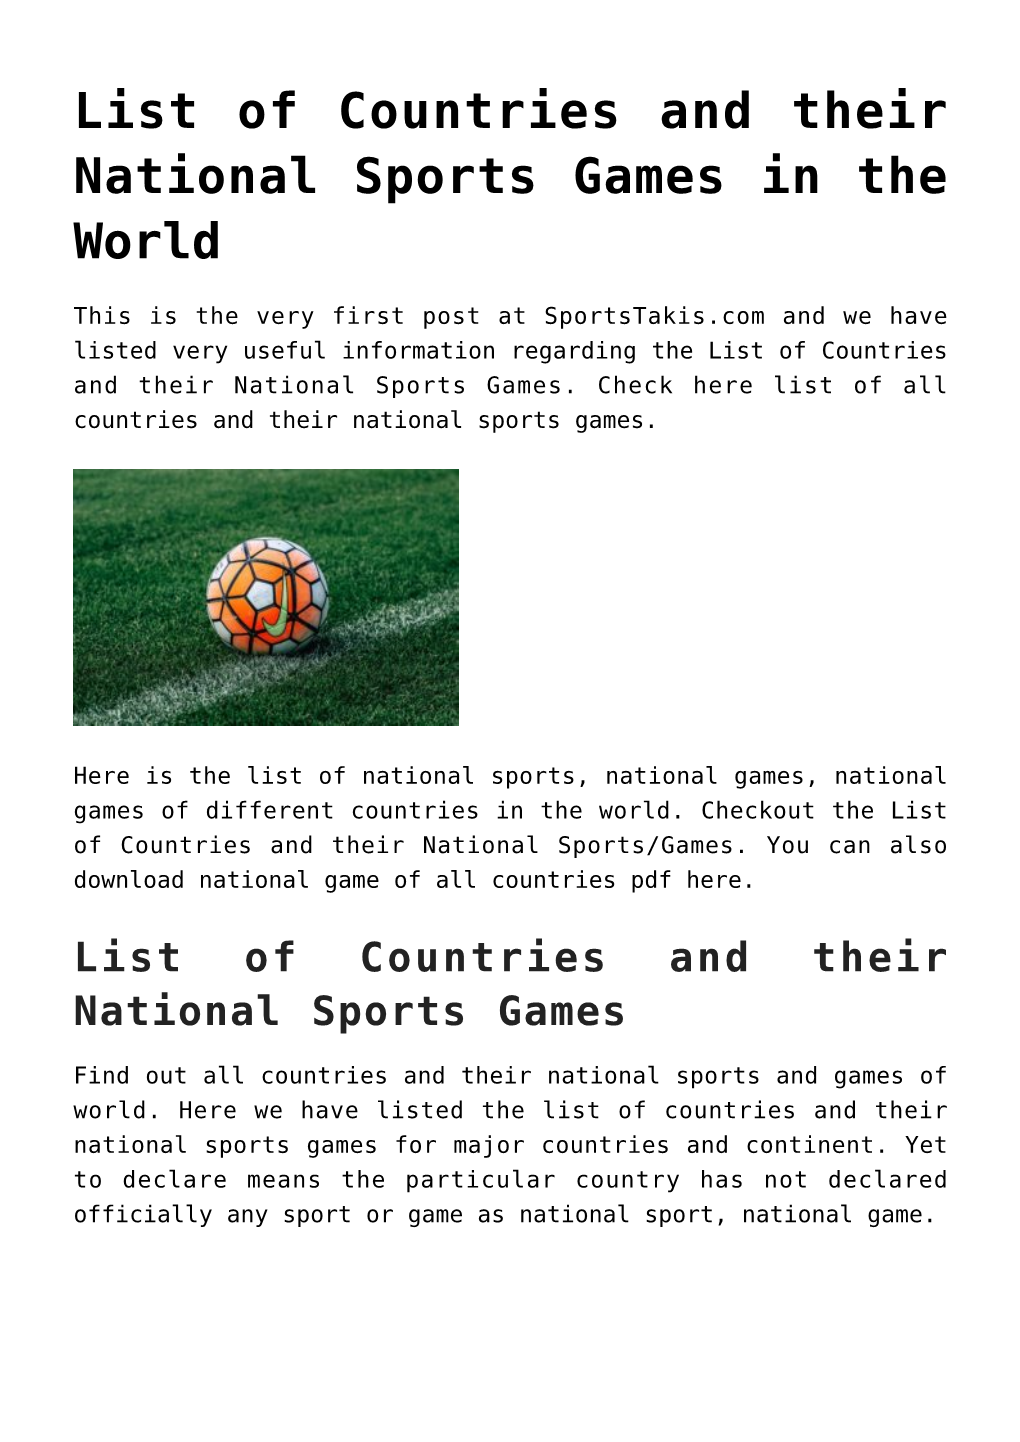 List of Countries and Their National Sports Games in the World